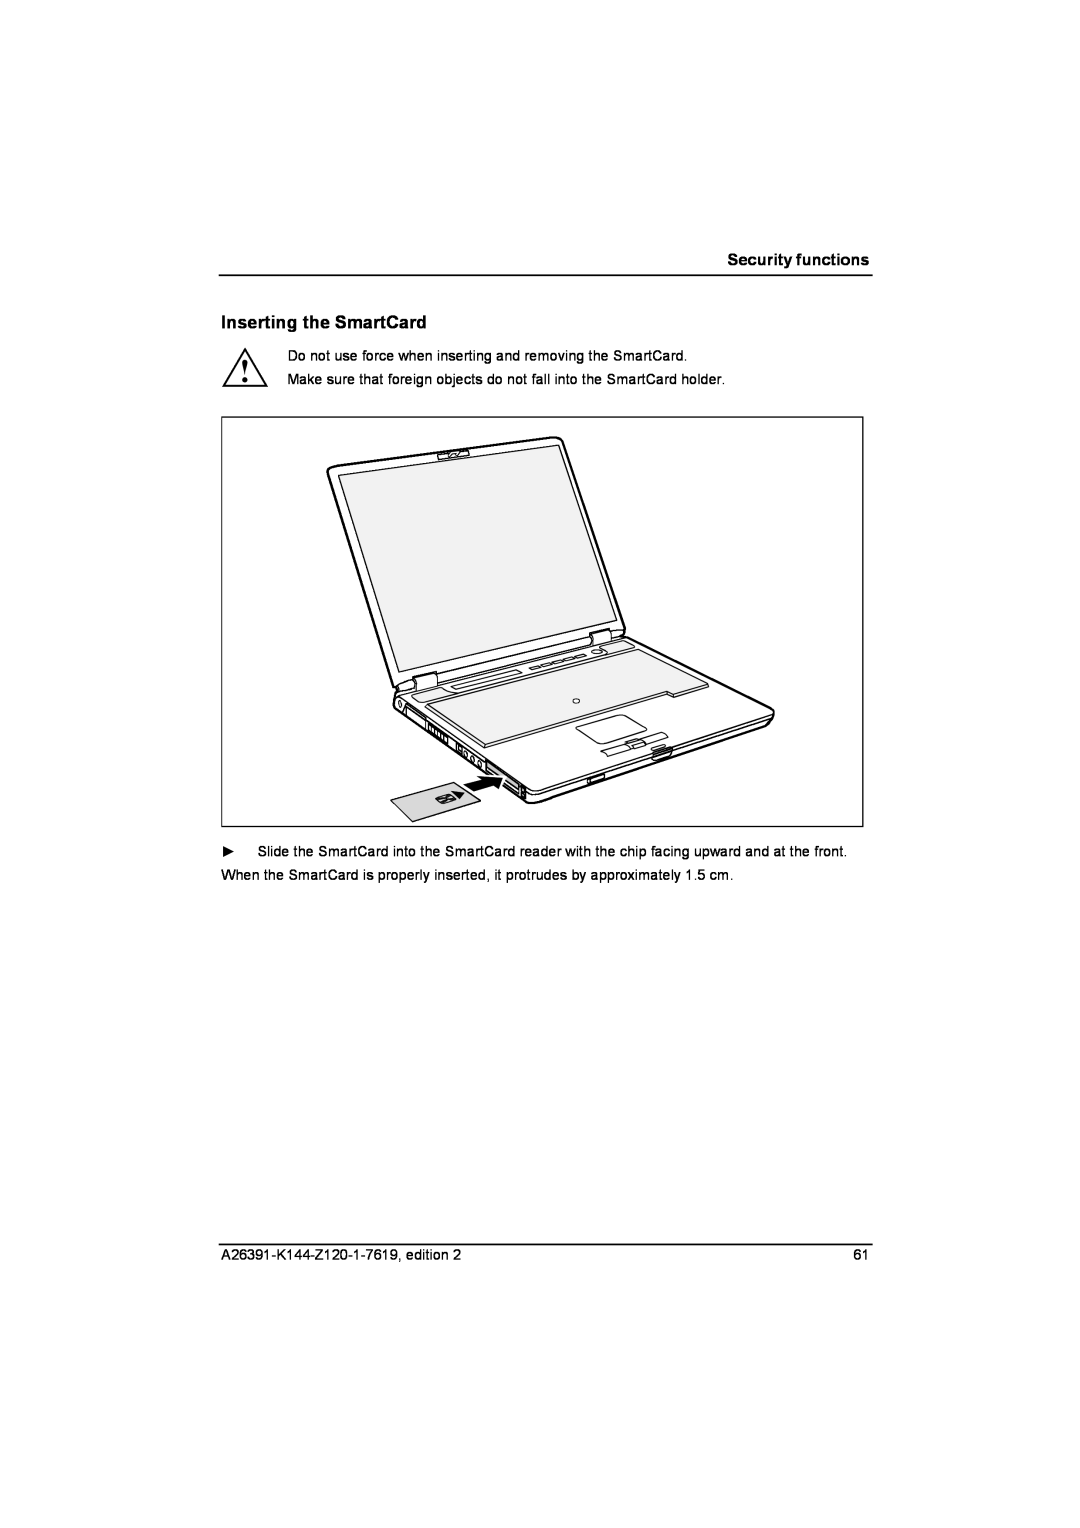 Fujitsu S SERIES manual Inserting the SmartCard, Security functions 